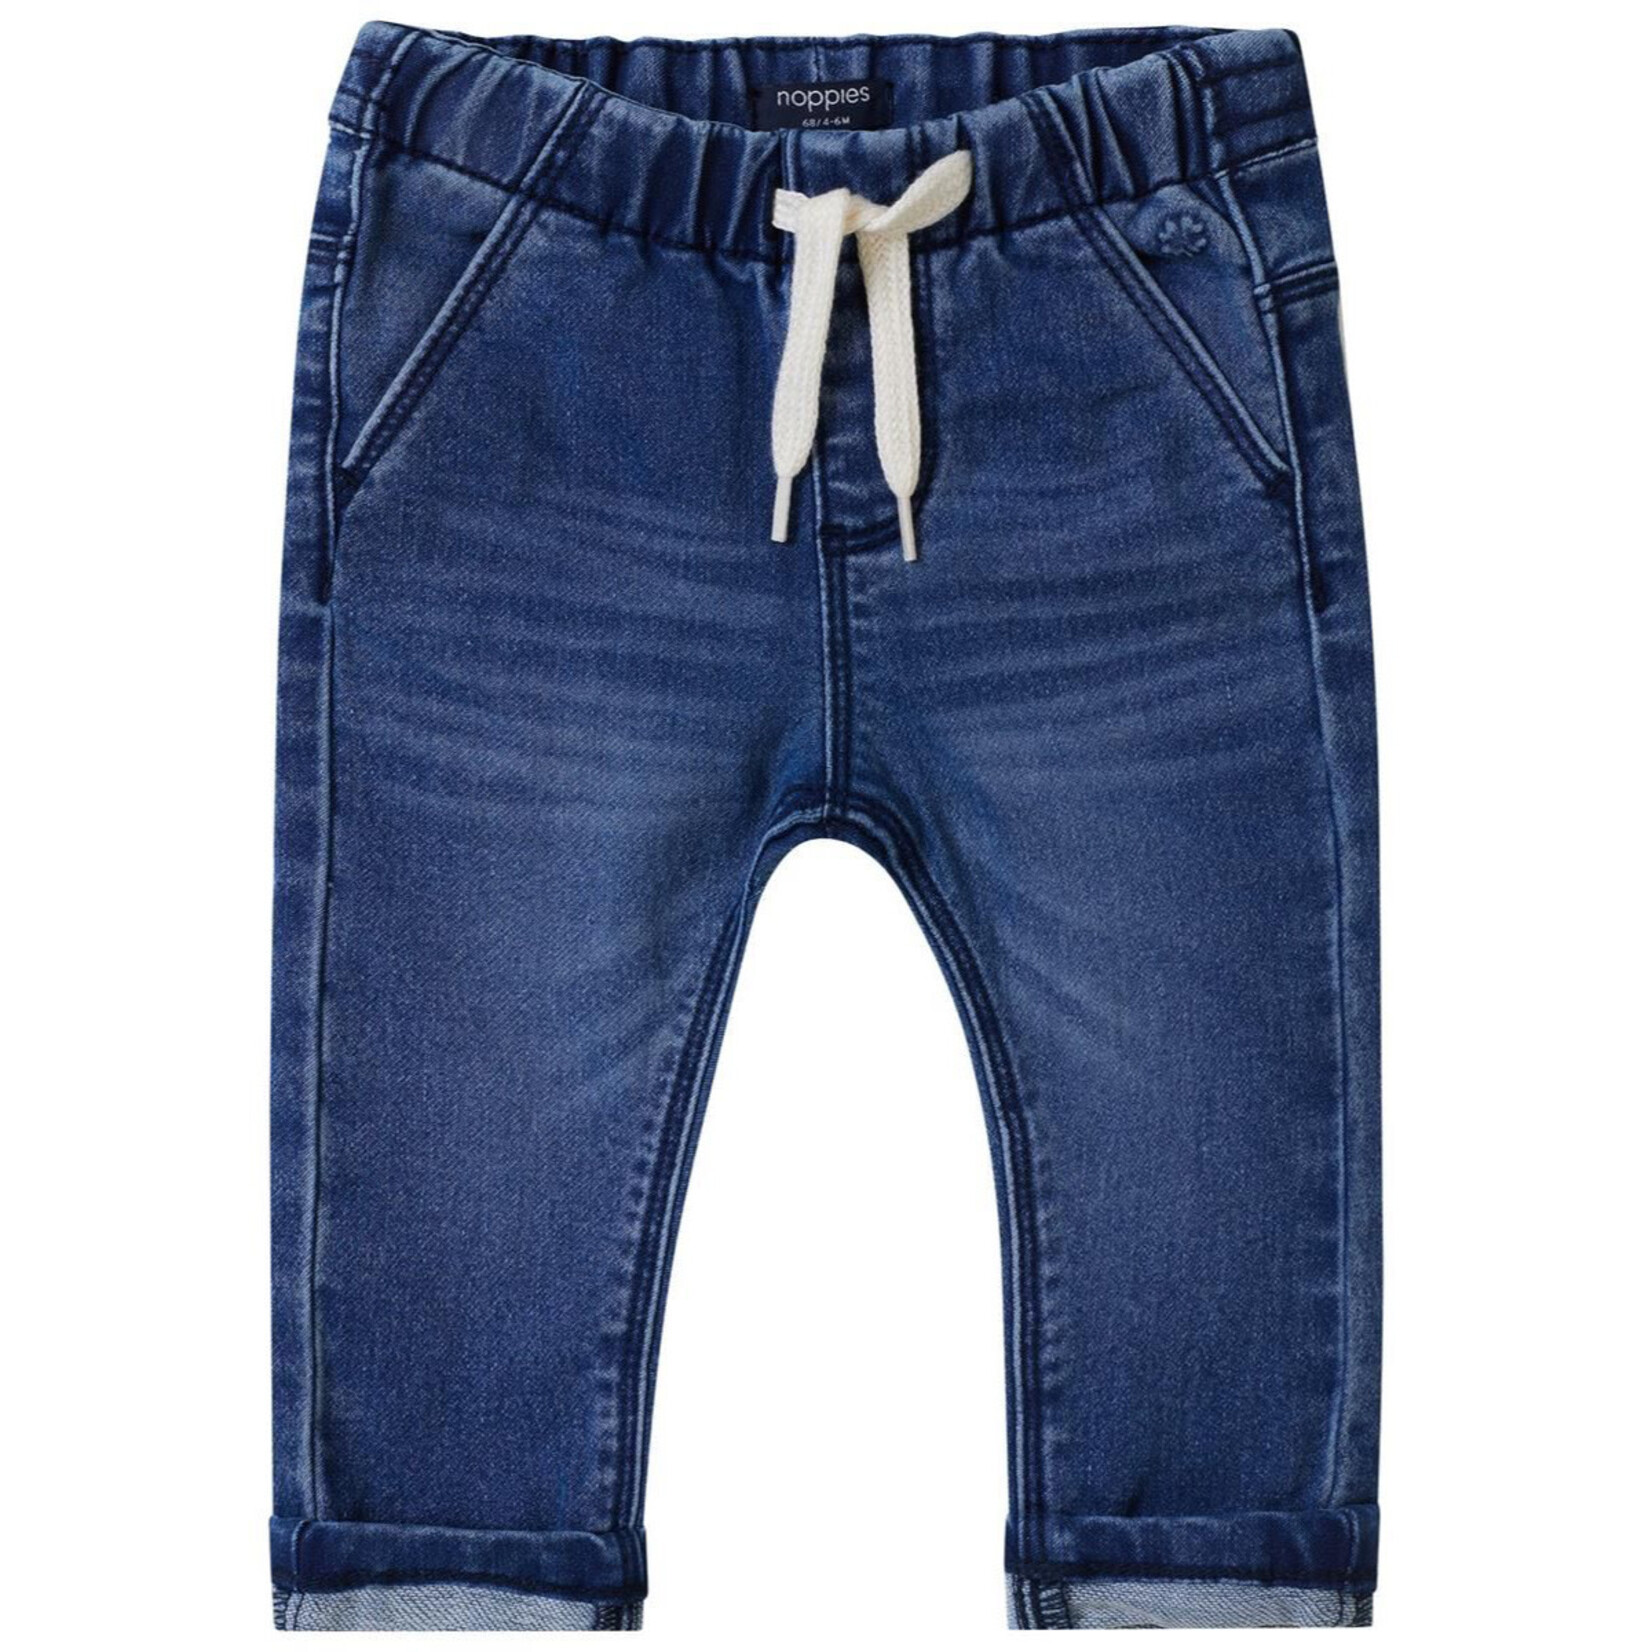 Noppies Noppies - Tappan Relaxed Fit Jean